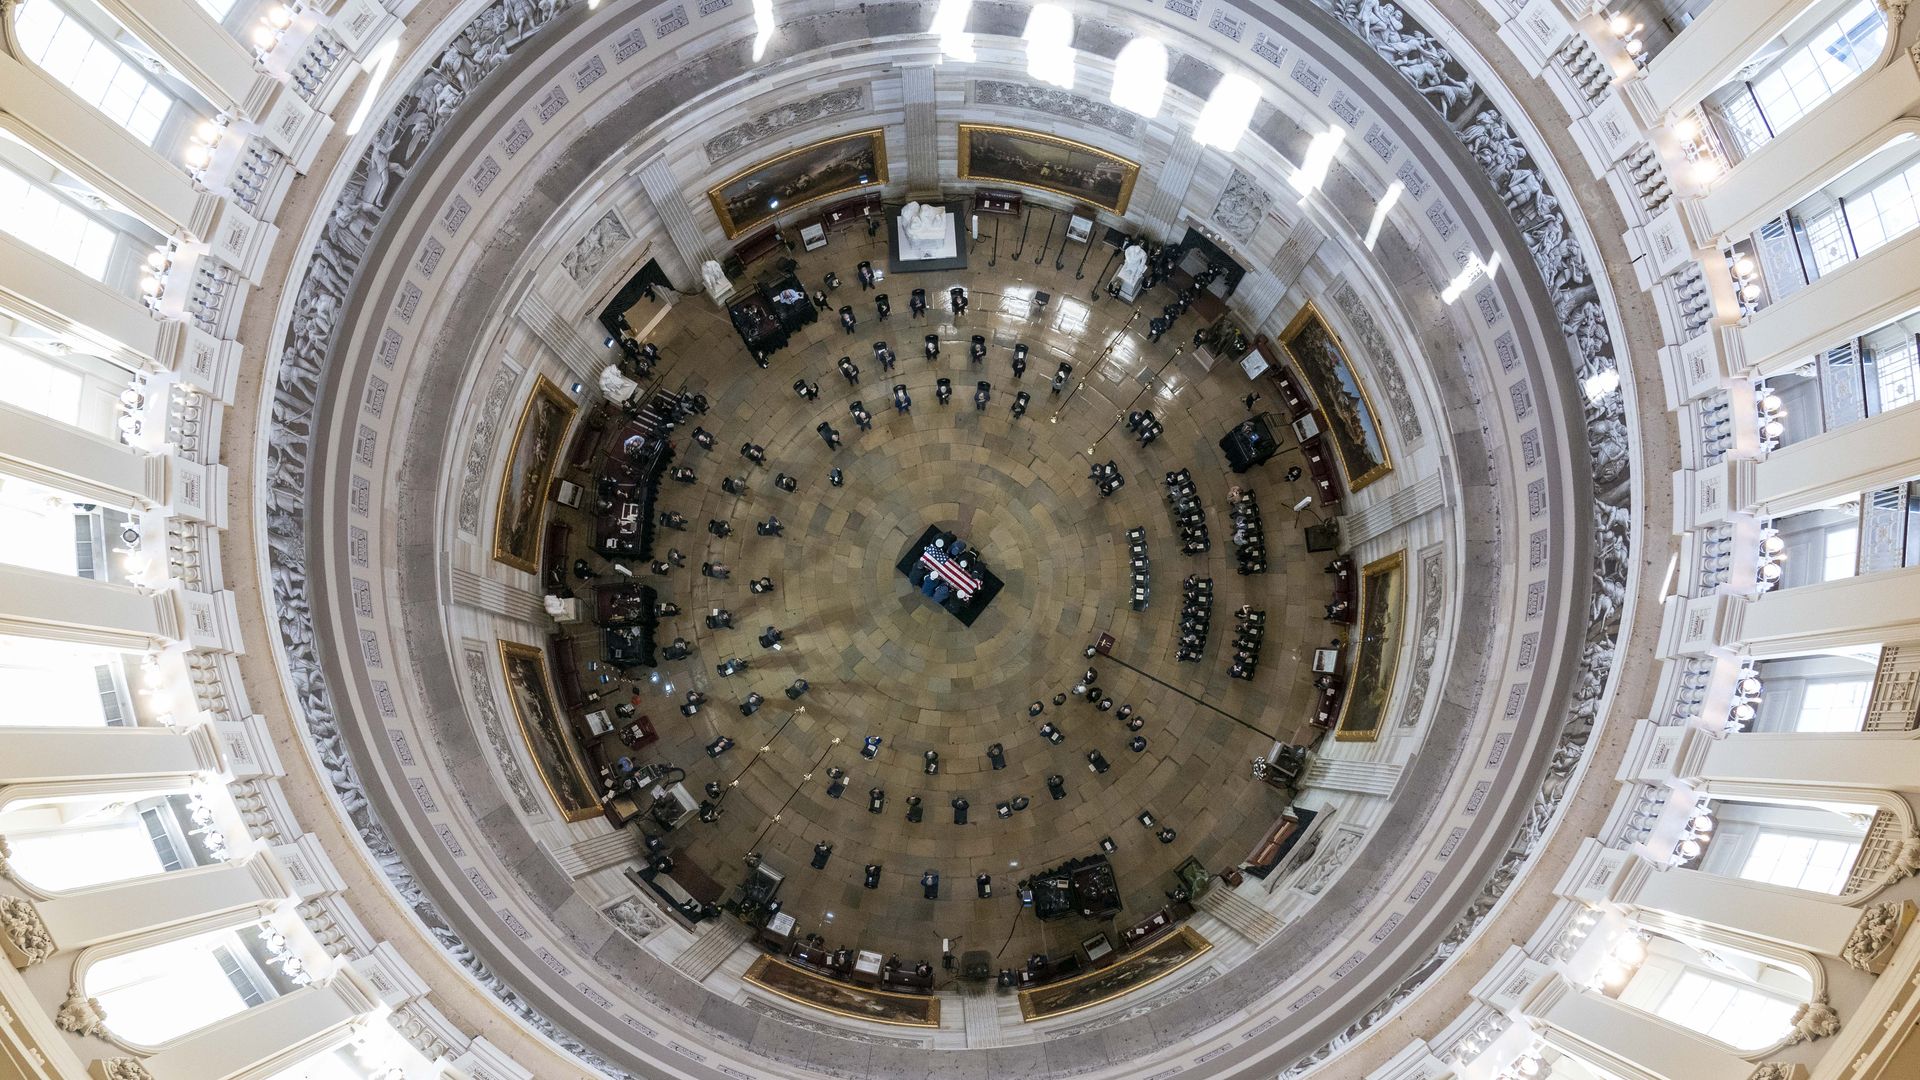 A photo from the Capitol Dome shows the casket of the late Sen. Harry Reid far below on the Rotunda floor.